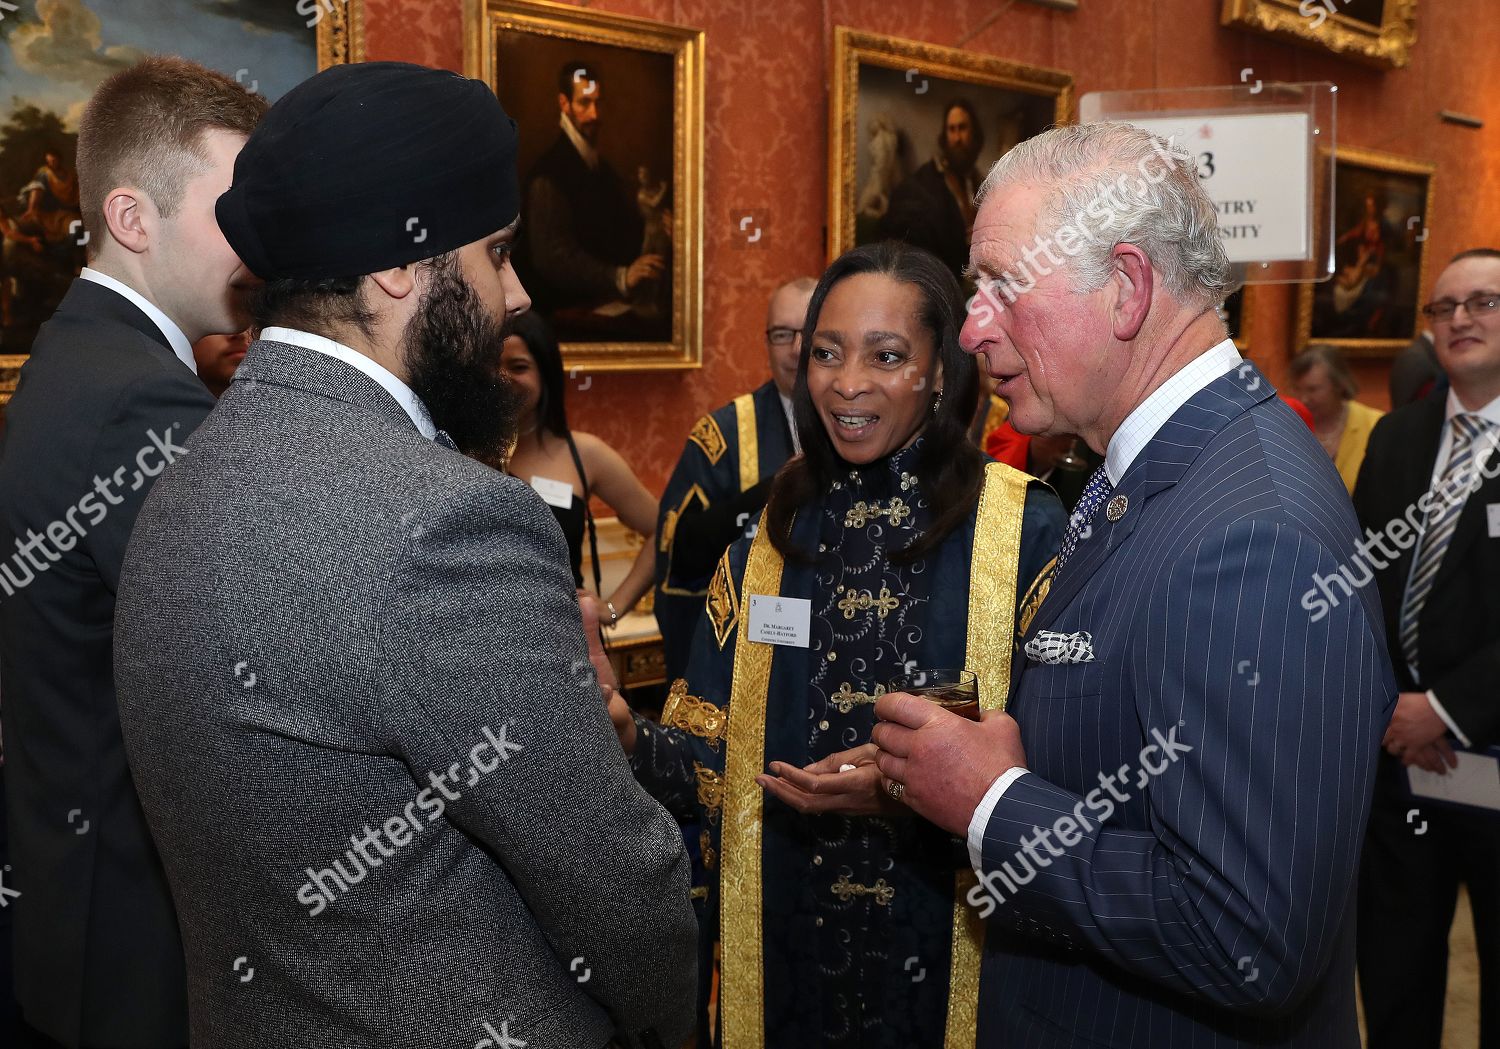 CASA REAL BRITÁNICA - Página 28 Queens-anniversary-prizes-for-higher-and-further-education-at-buckingham-palace-london-uk-shutterstock-editorial-10562241m